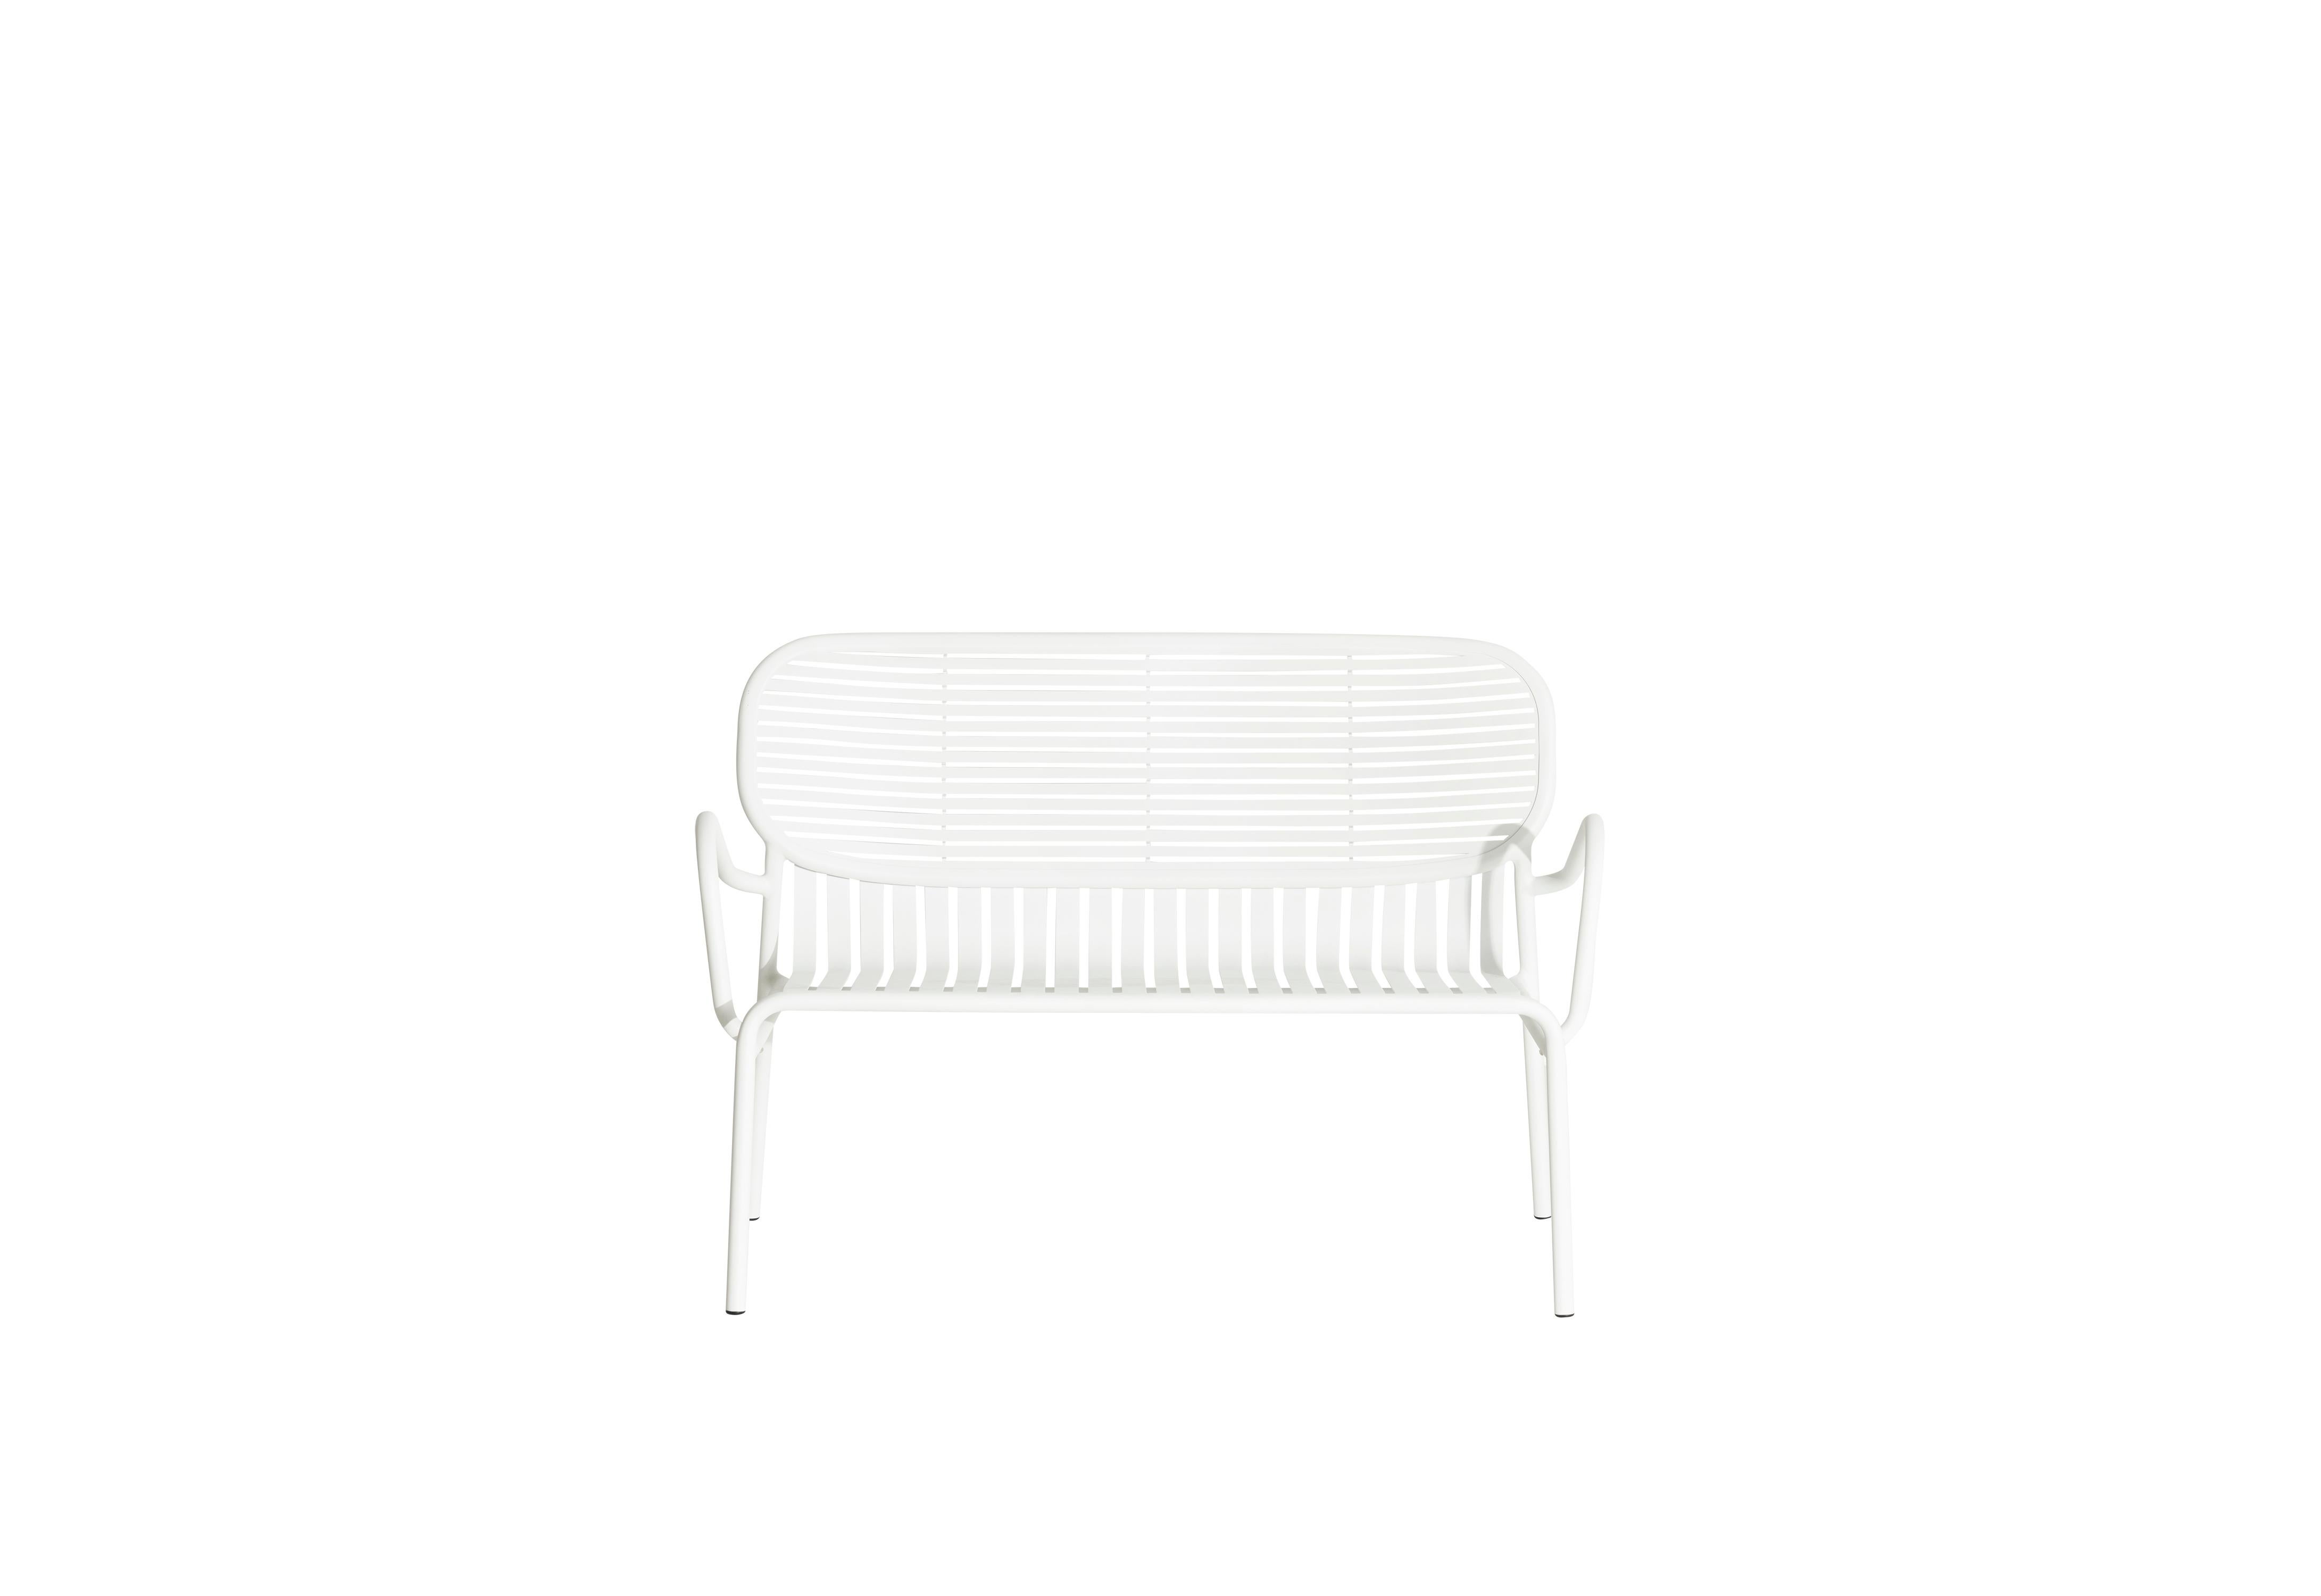 Petite Friture Week-End Sofa in White Aluminium by Studio BrichetZiegler, 2017

The week-end collection is a full range of outdoor furniture, in aluminium grained epoxy paint, matt finish, that includes 18 functions and 8 colours for the retail